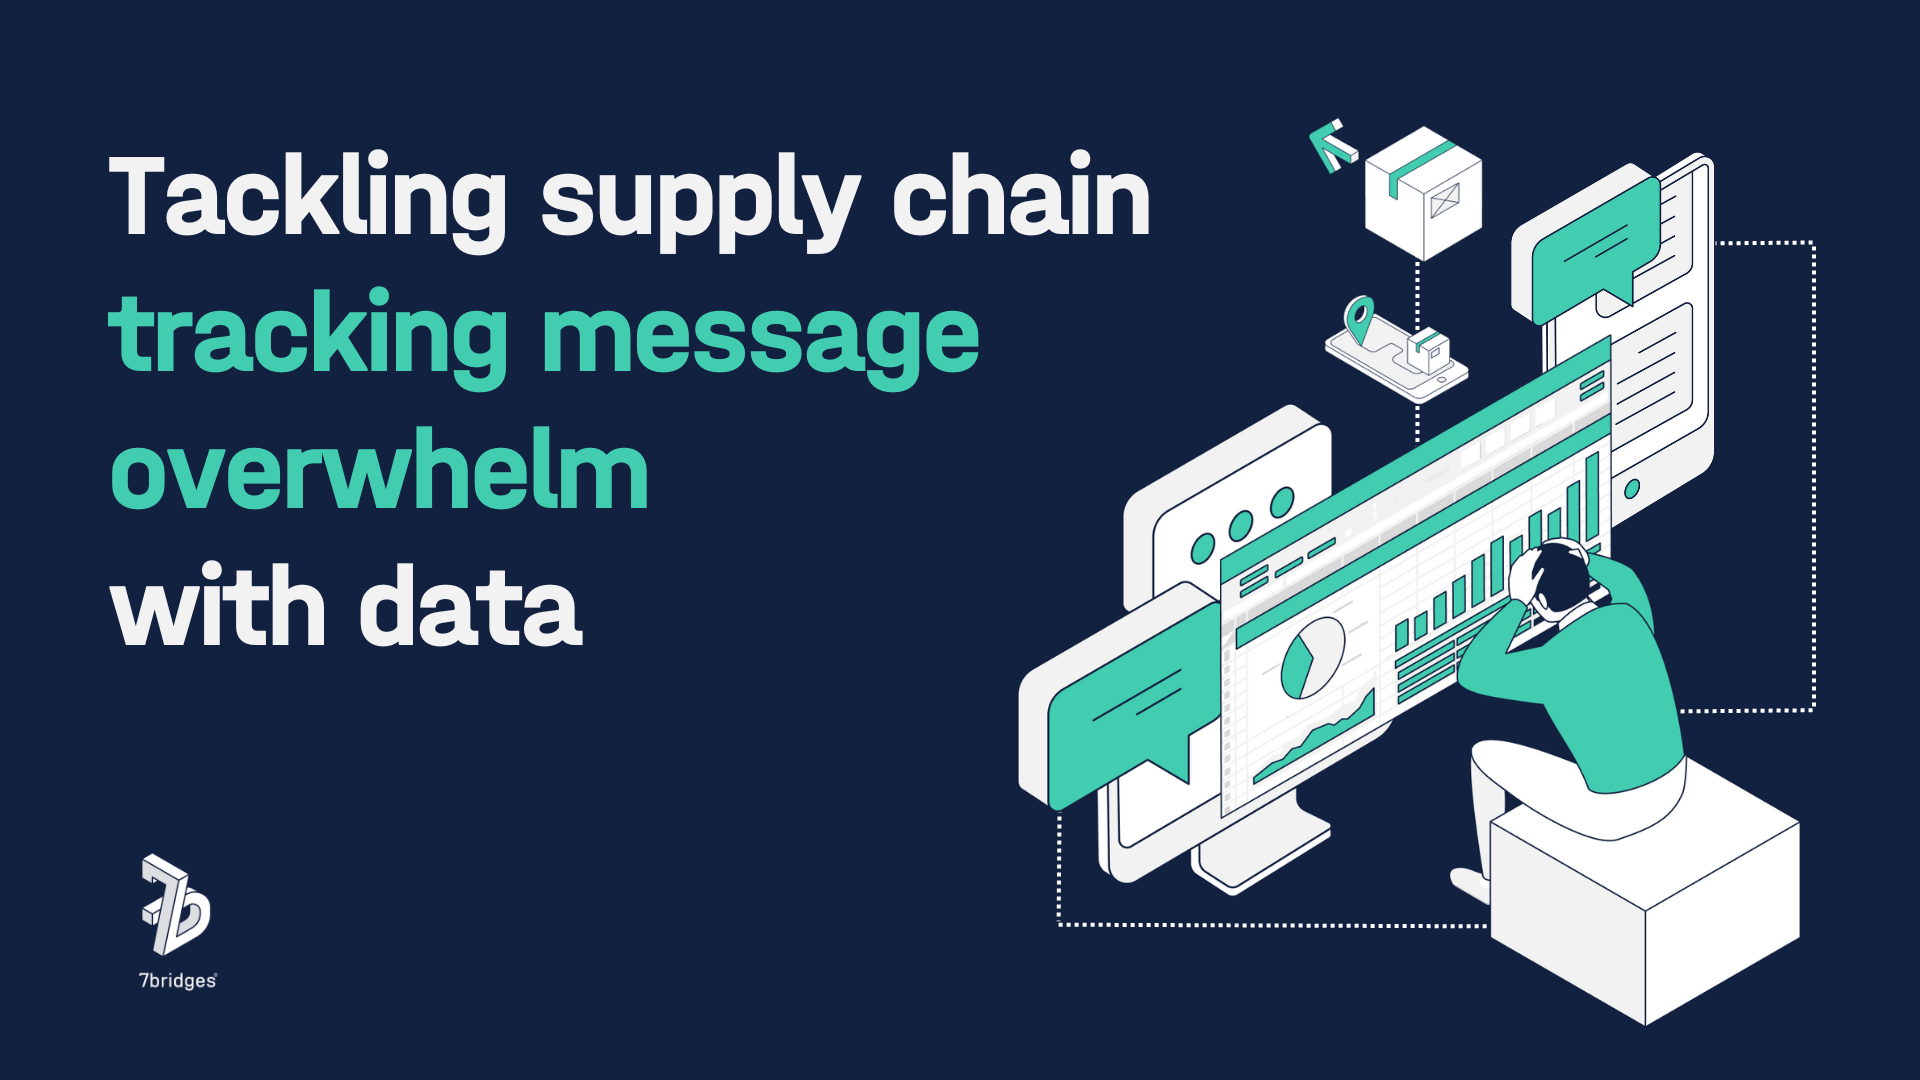 Tackling supply chain tracking message overwhelm